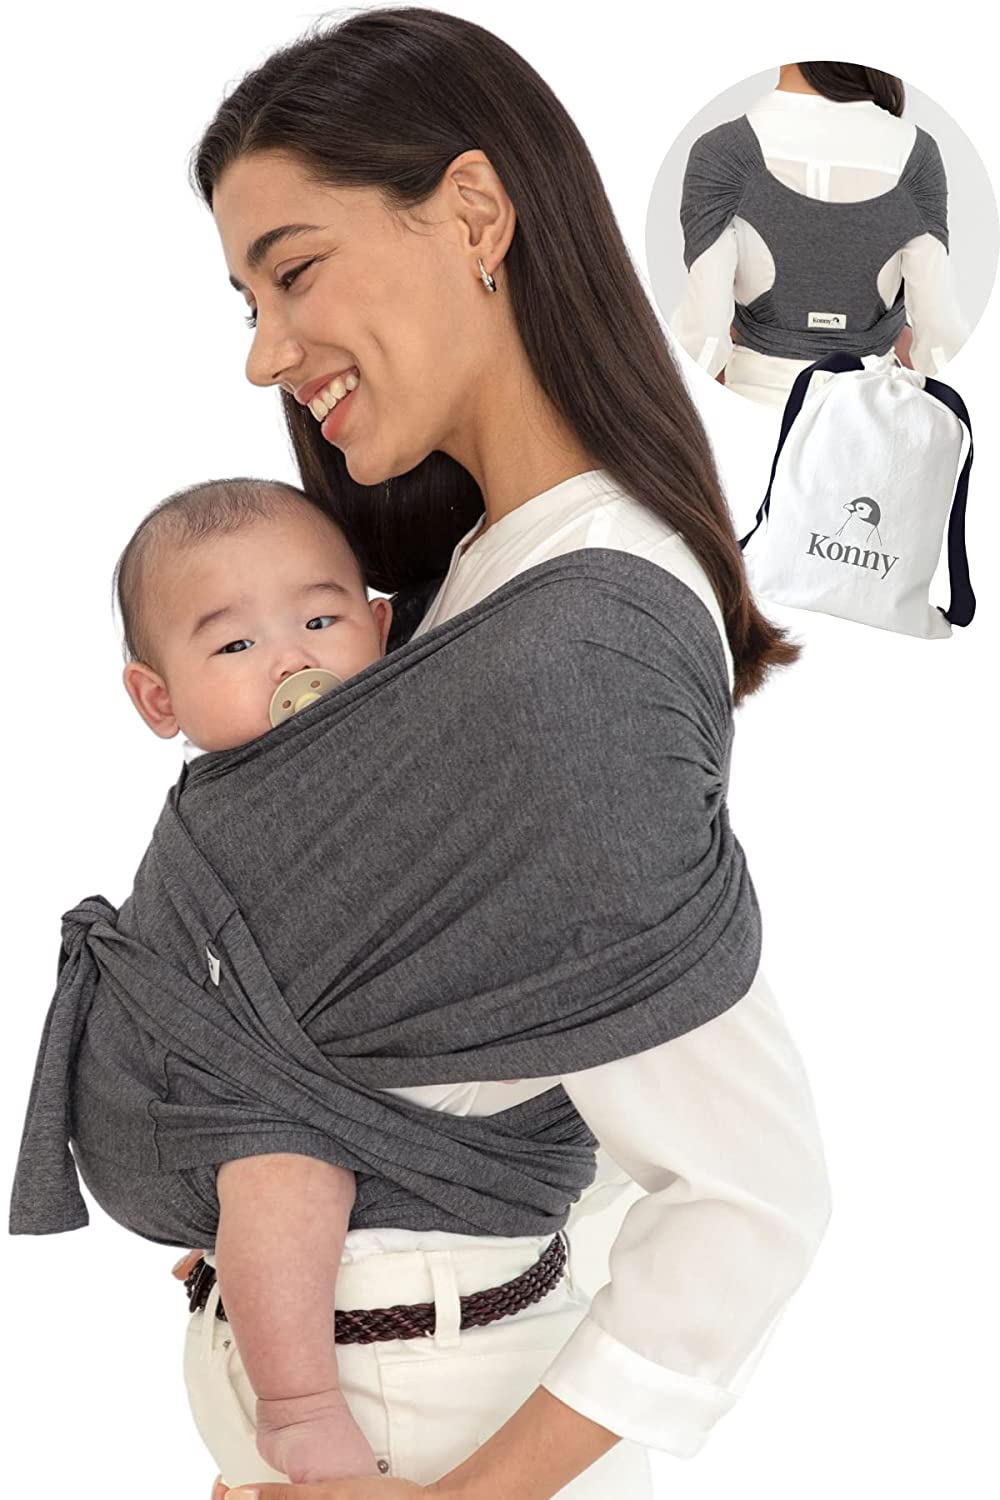 Konny Baby Carrier | Ultra-light, Easy Baby Sling | Newborns, Infants up to 20 kg Toddlers | Soft and Breathable Fabric | Useful Sleep Solution (Anthracite, XL)